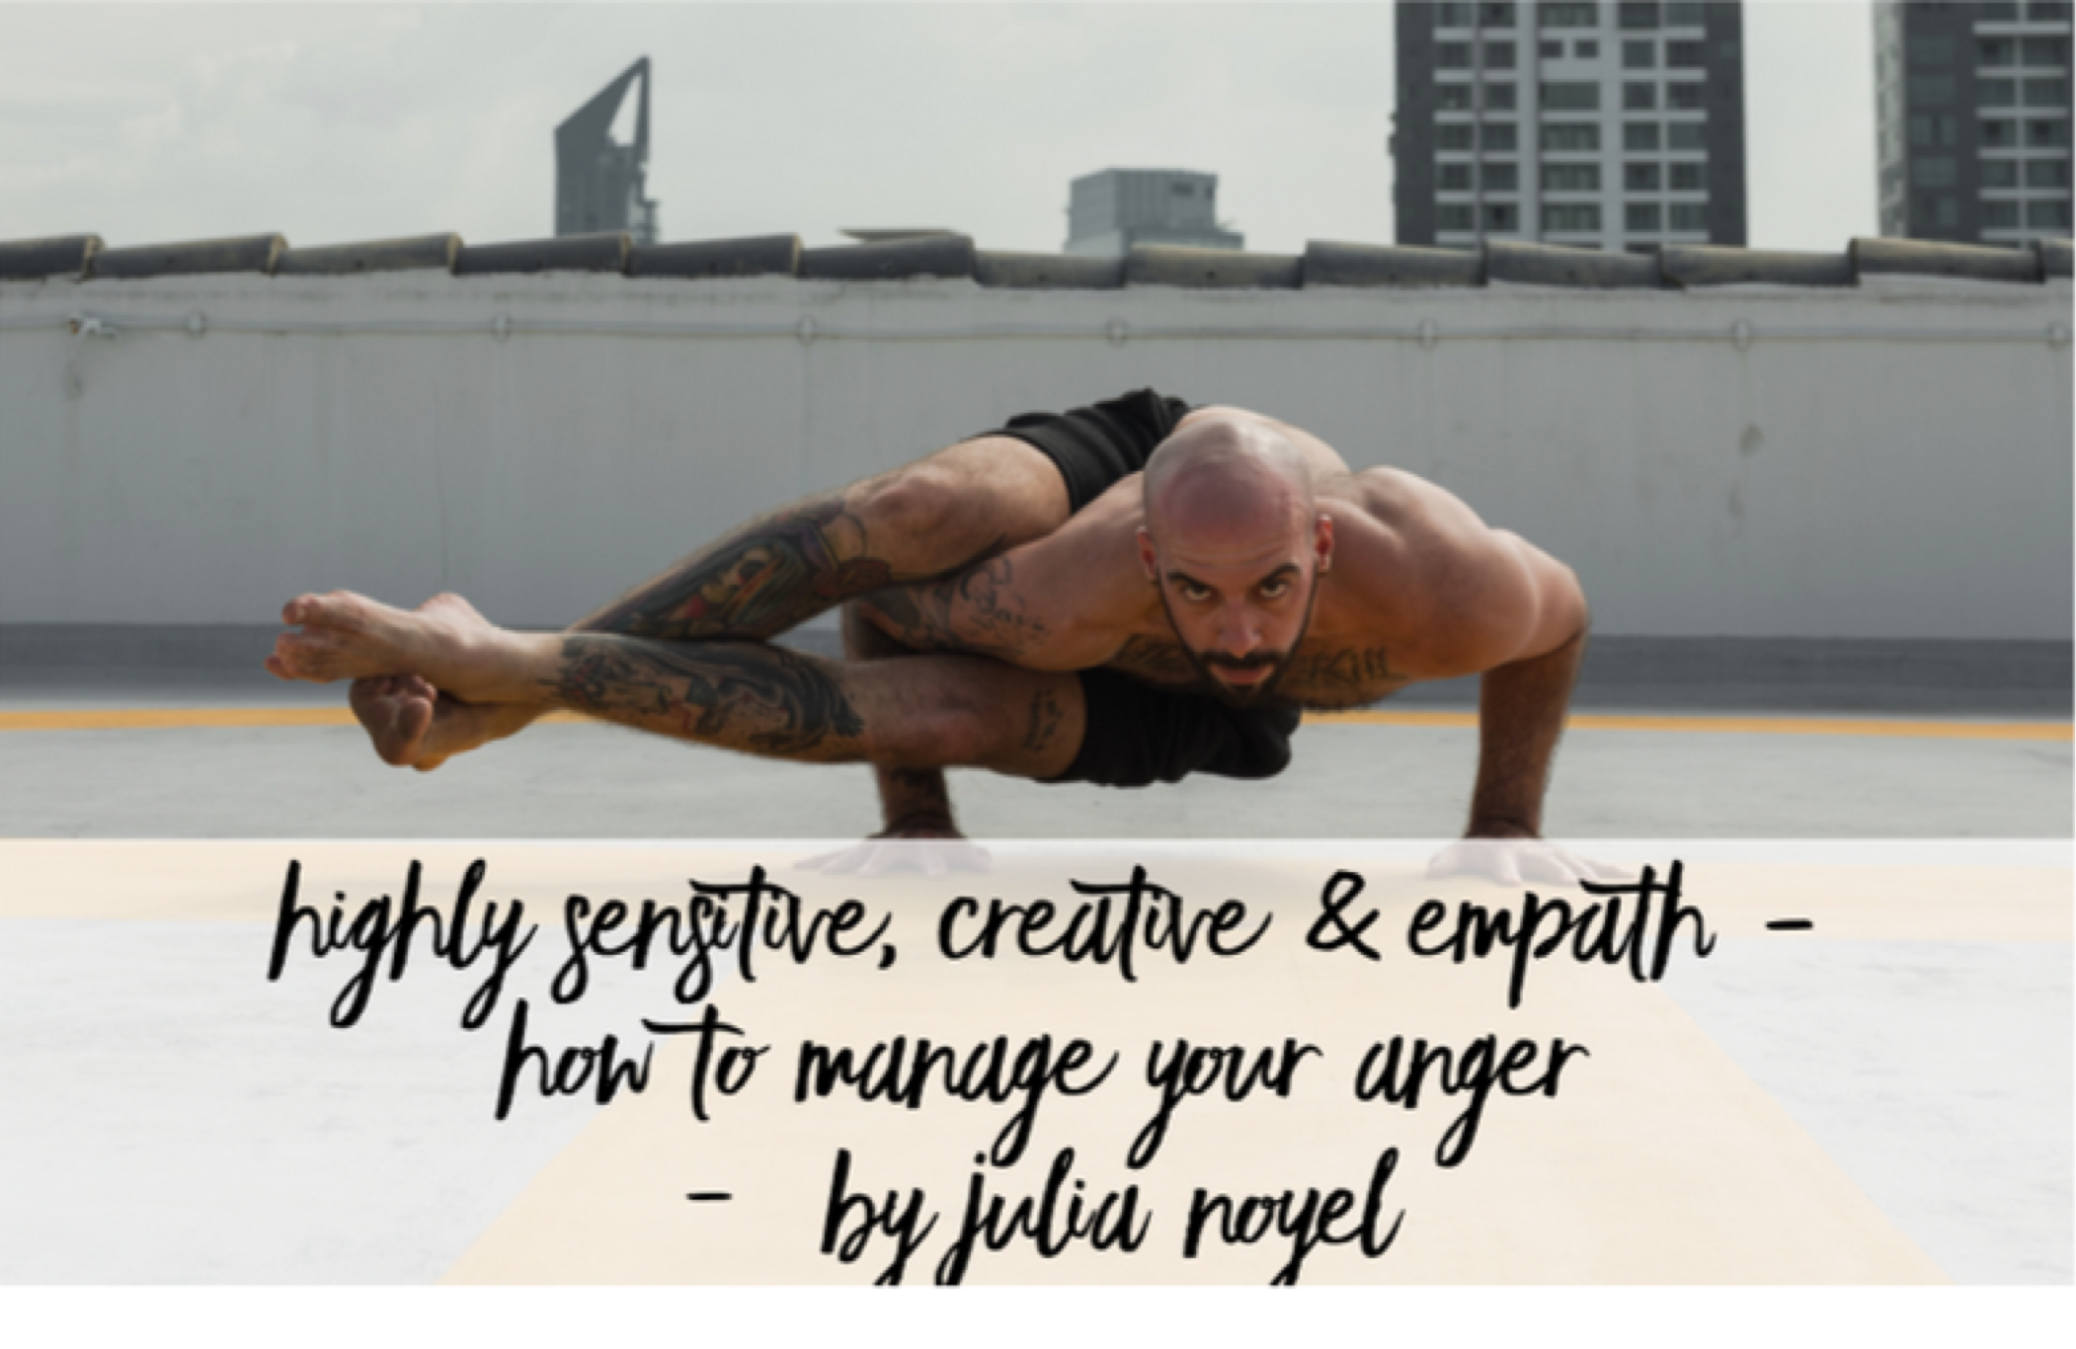 highly sensitive & creative how to manager your anger by julia noyel